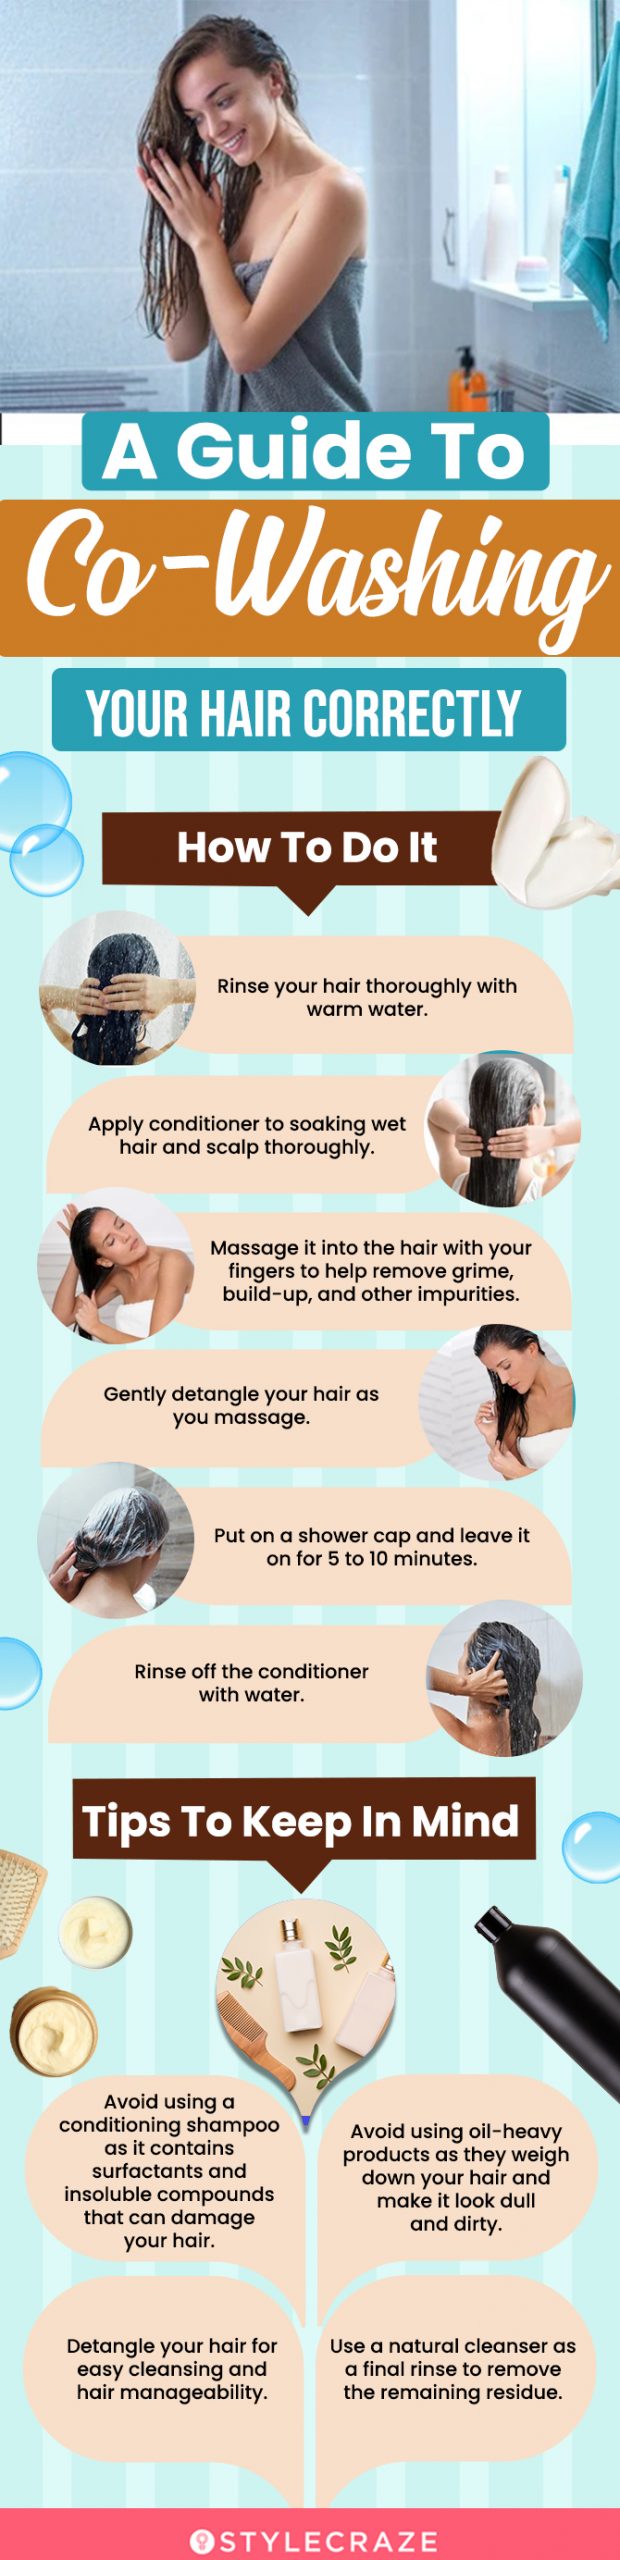 a guide to co-washing your hair correctly(infographic)